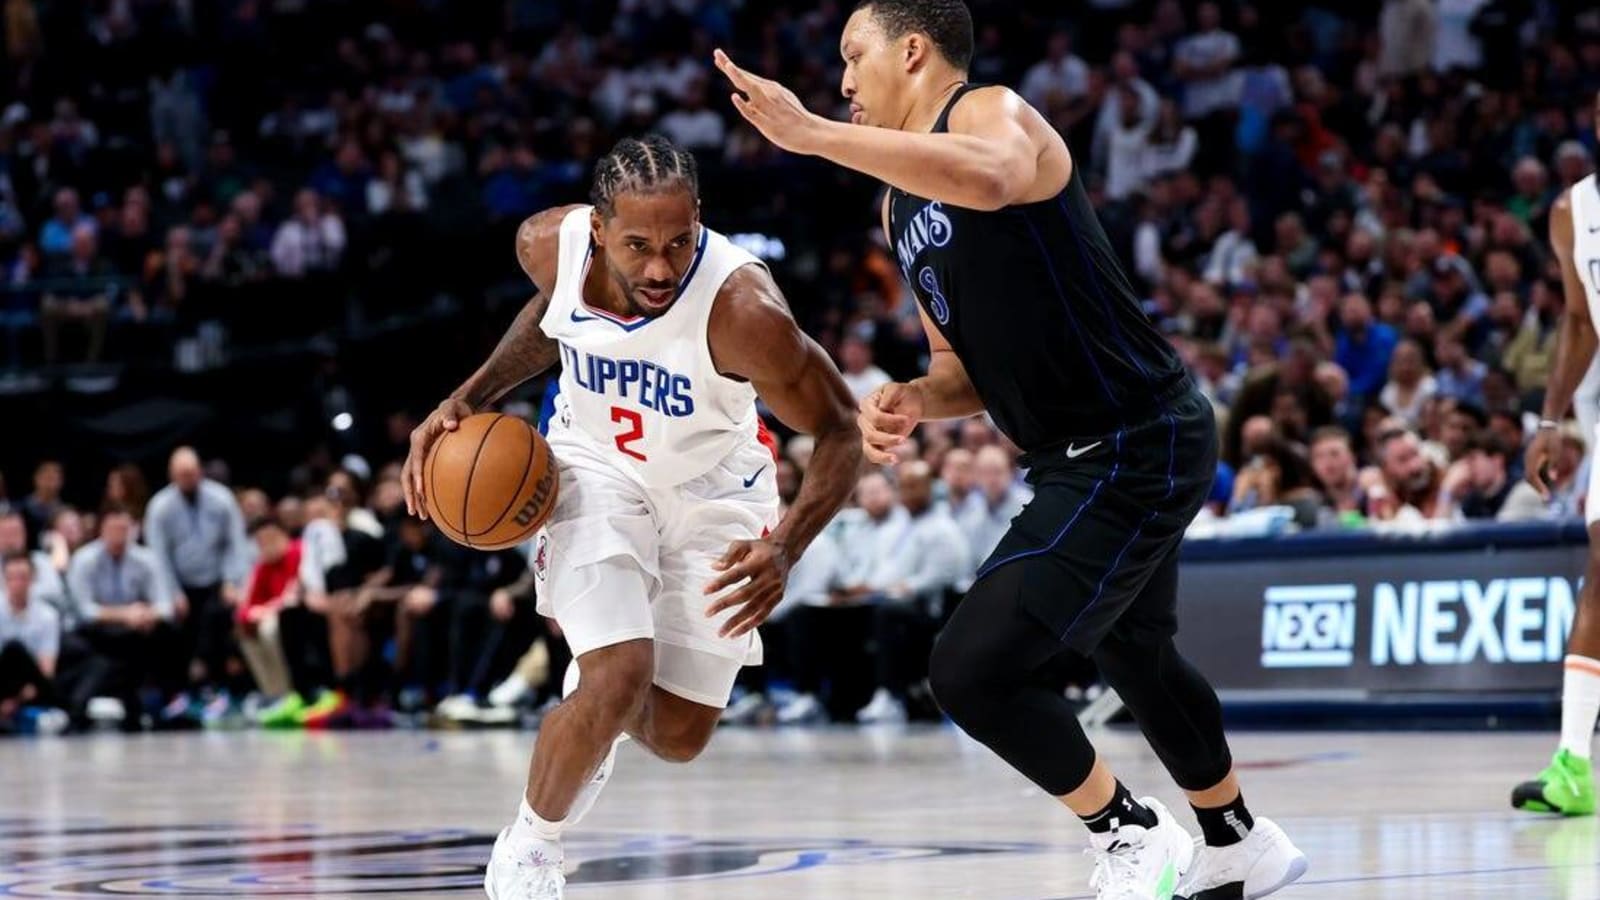 Clippers could have Kawhi Leonard back when Heat visit